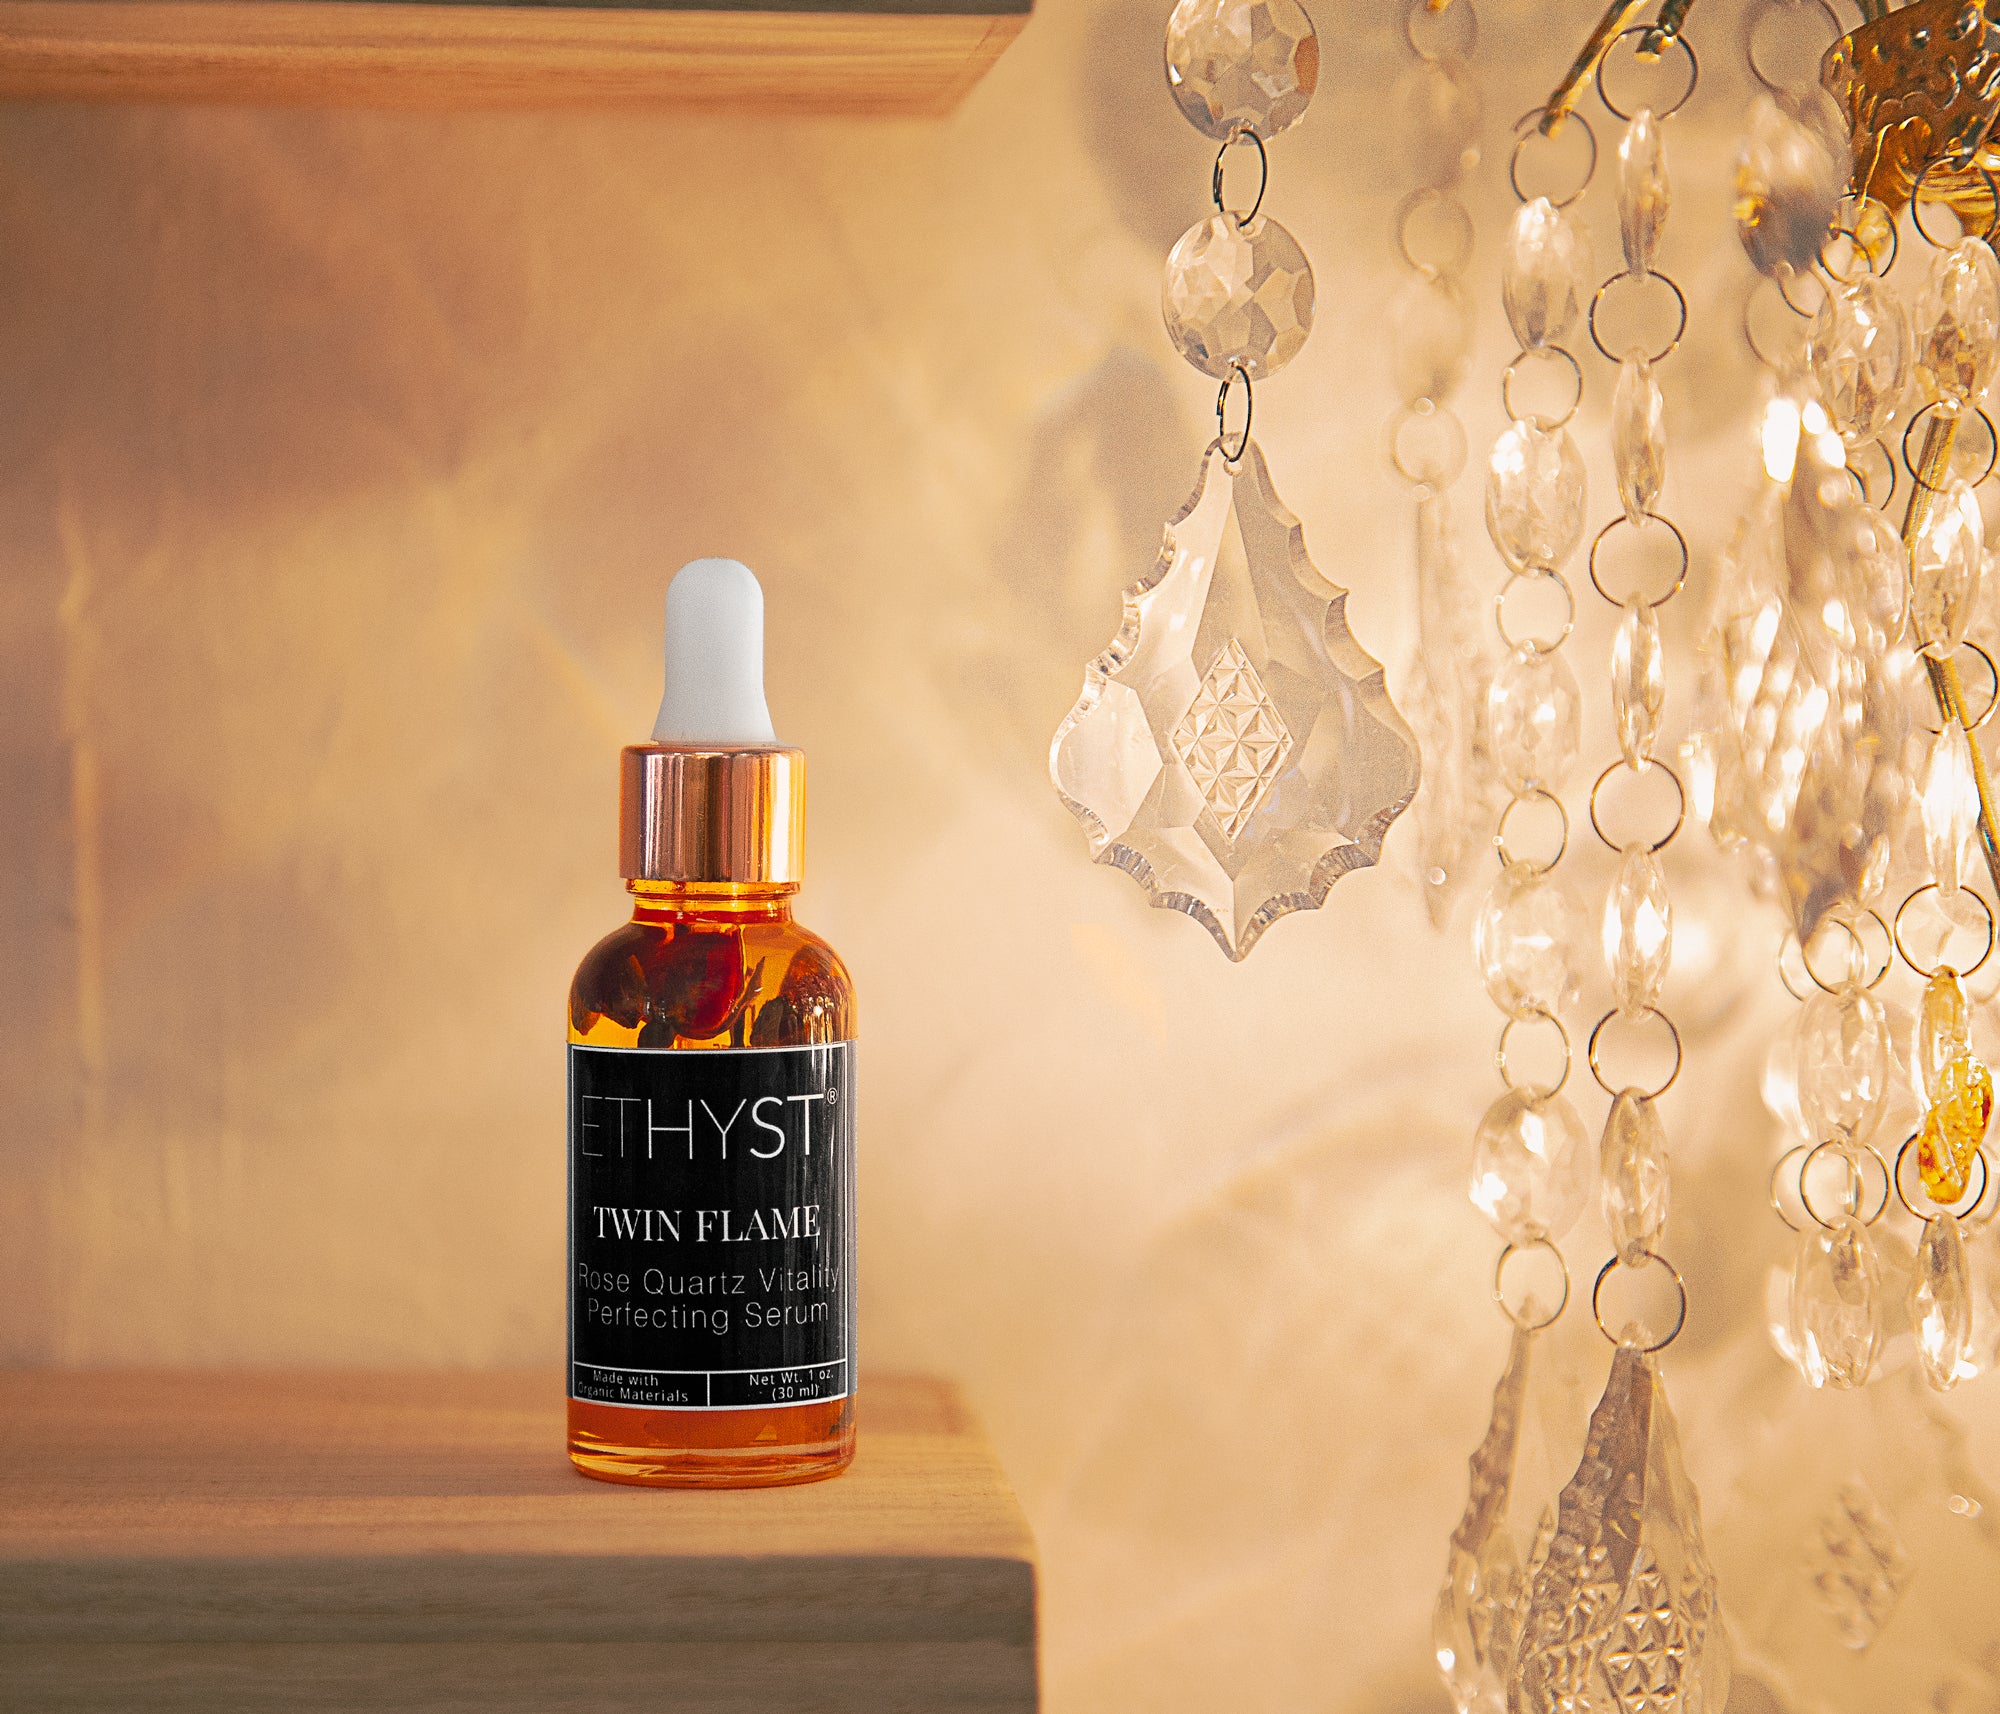 Ethyst Twin Flame Rose Quartz Vitality Perfecting Serum from champagne apothecary